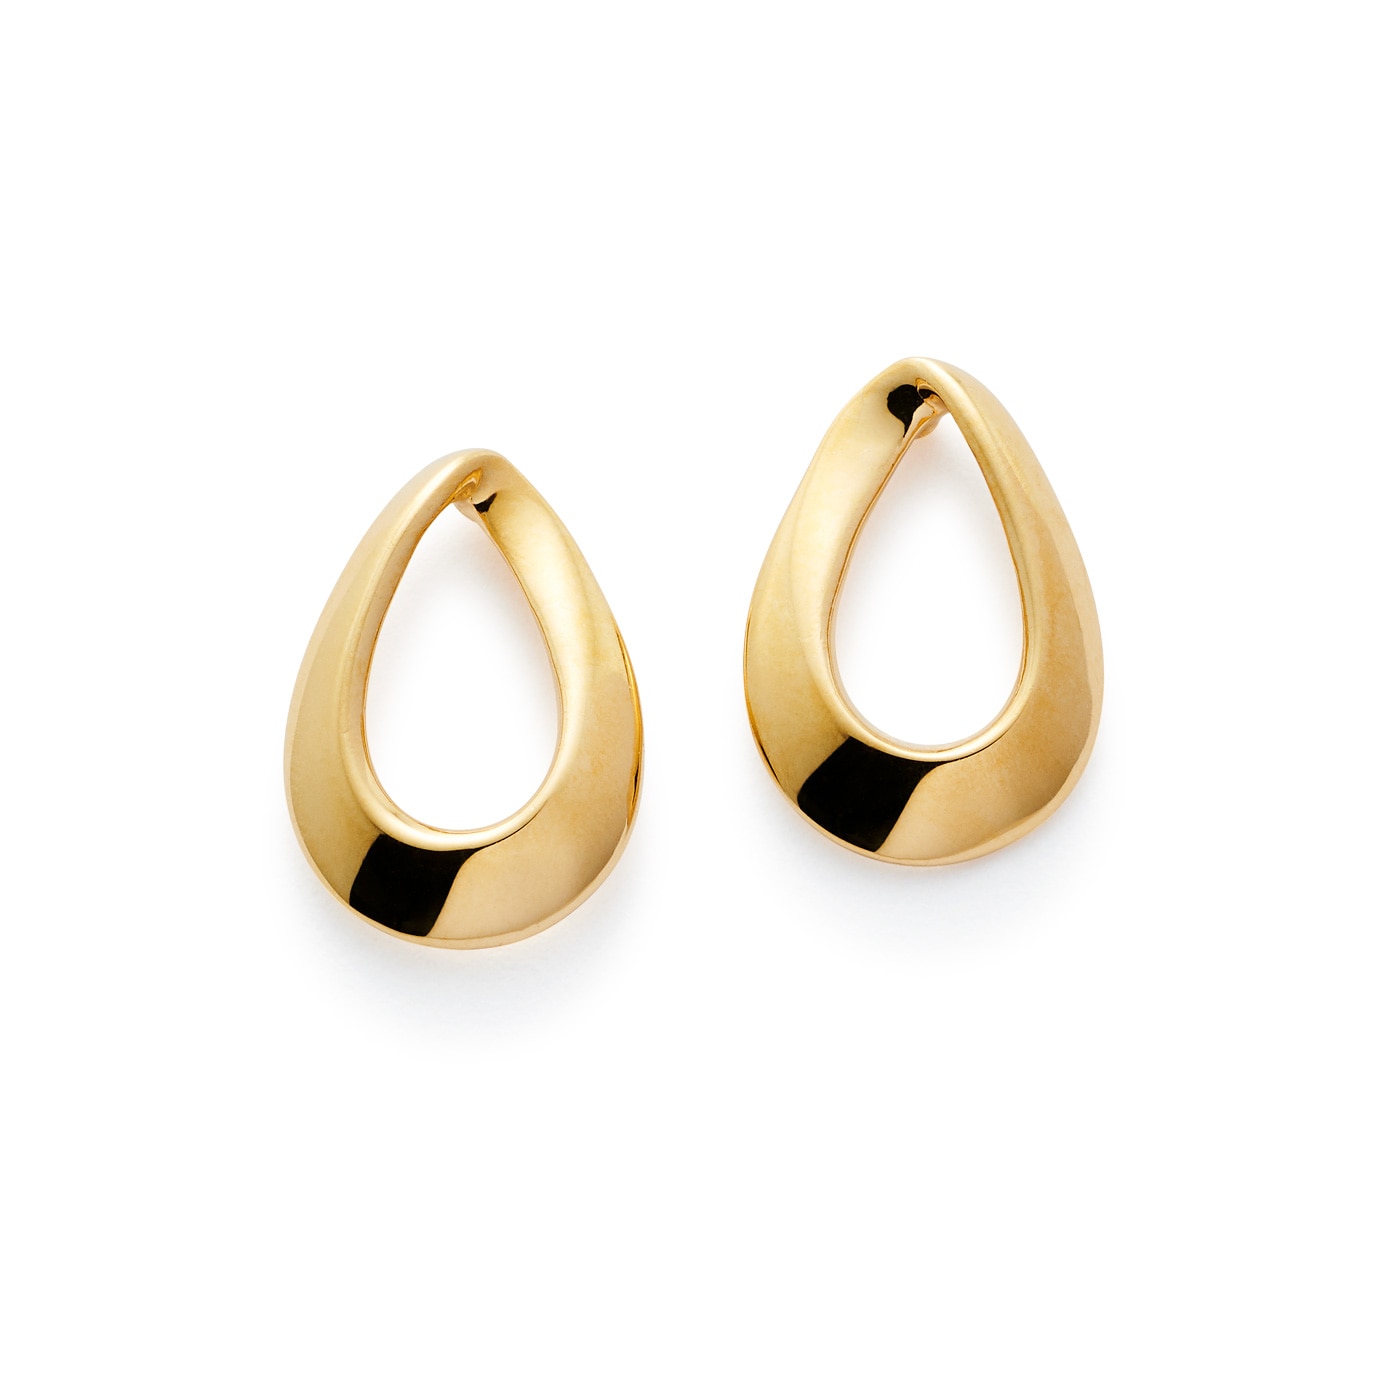 Hollow drop earrings Gold Plated         